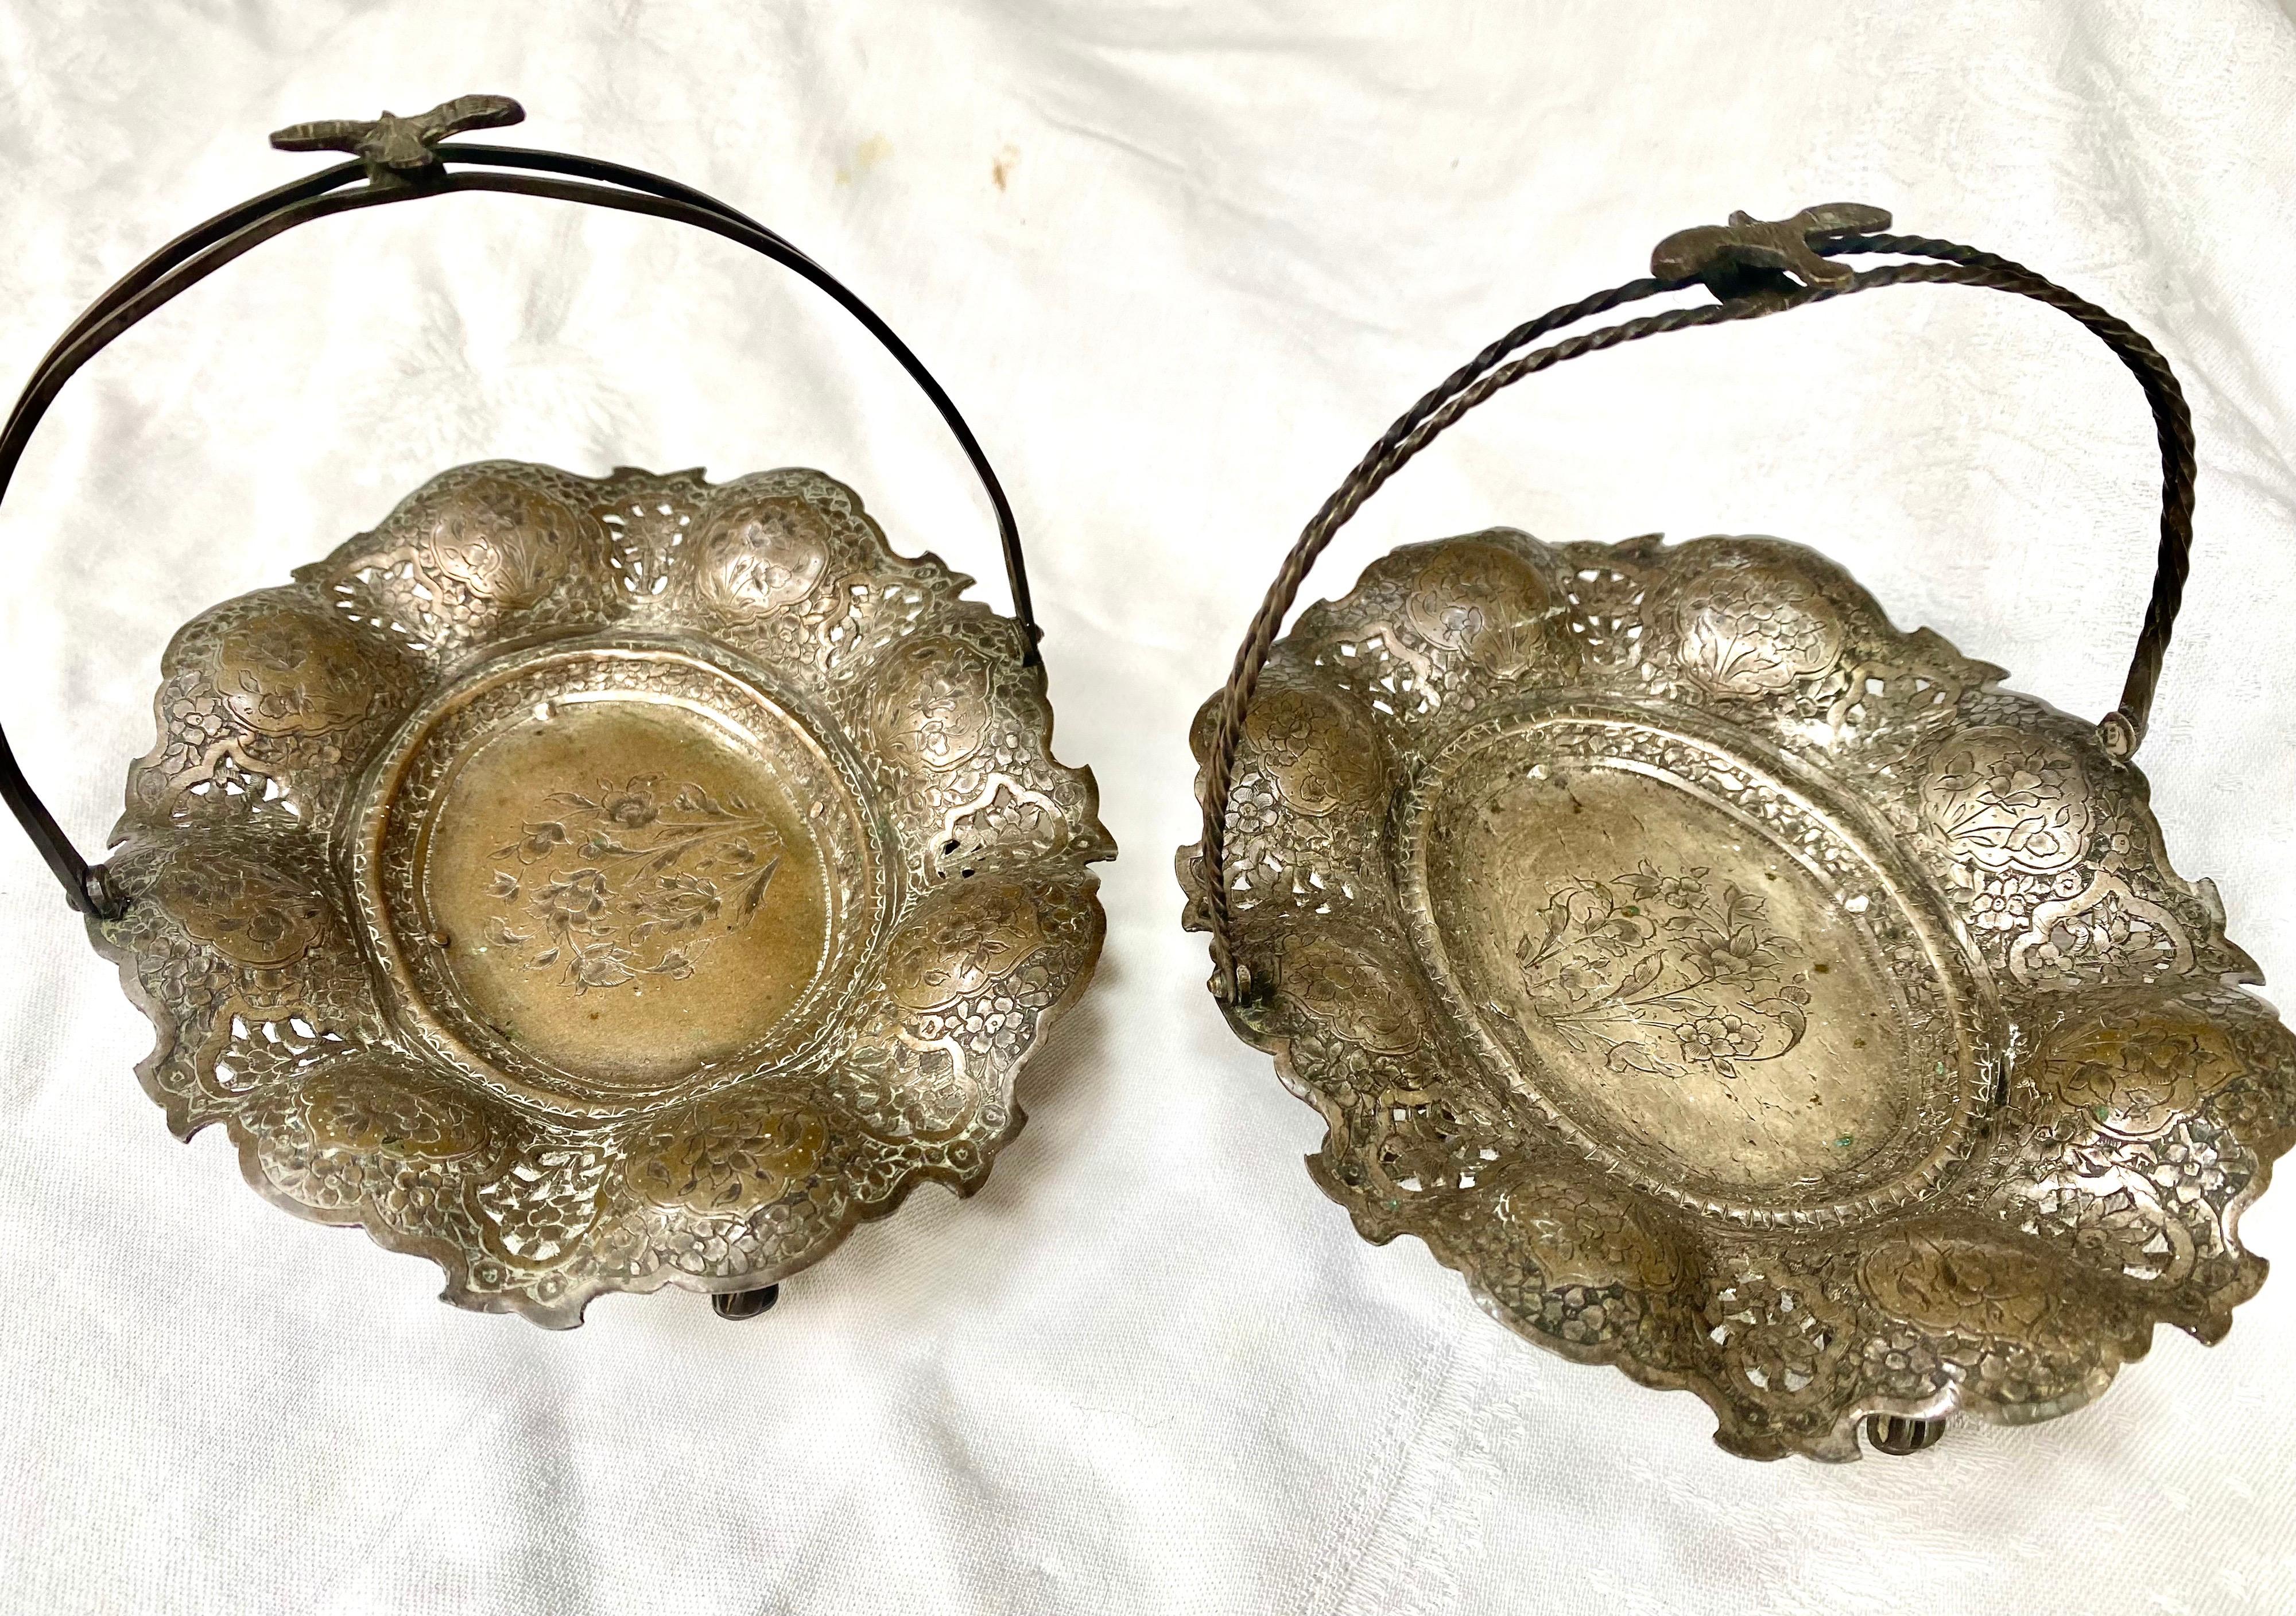 This beautiful antique silver plated pair of sweets dishes are in good condition. Visible signs of ageing and wear with some tarnishes and light scratches but still usable. The dimensions are 6.2 inches wide, 5 inches depth, 5 inches high(with the